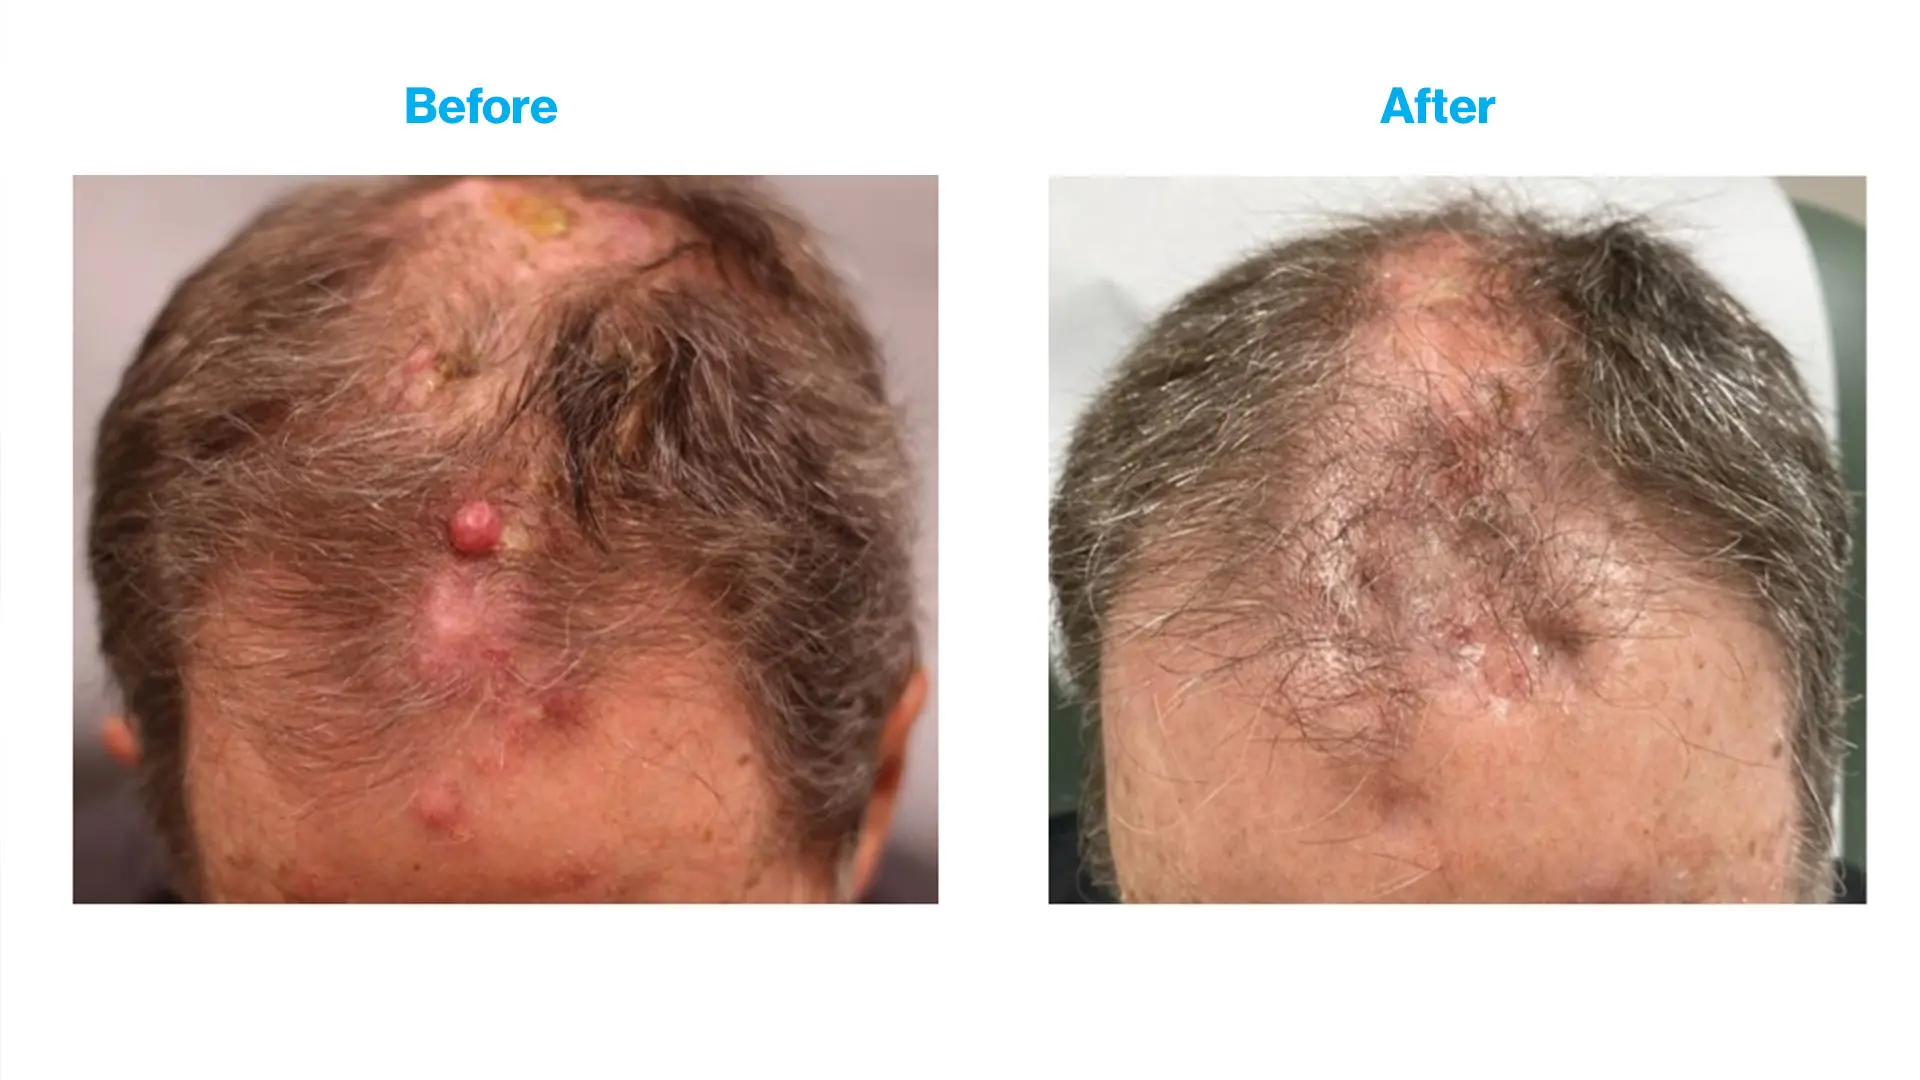 Before and after photos from the first patient to complete the clinical trial. The bumps on the patient’s scalp represent skin metastases.